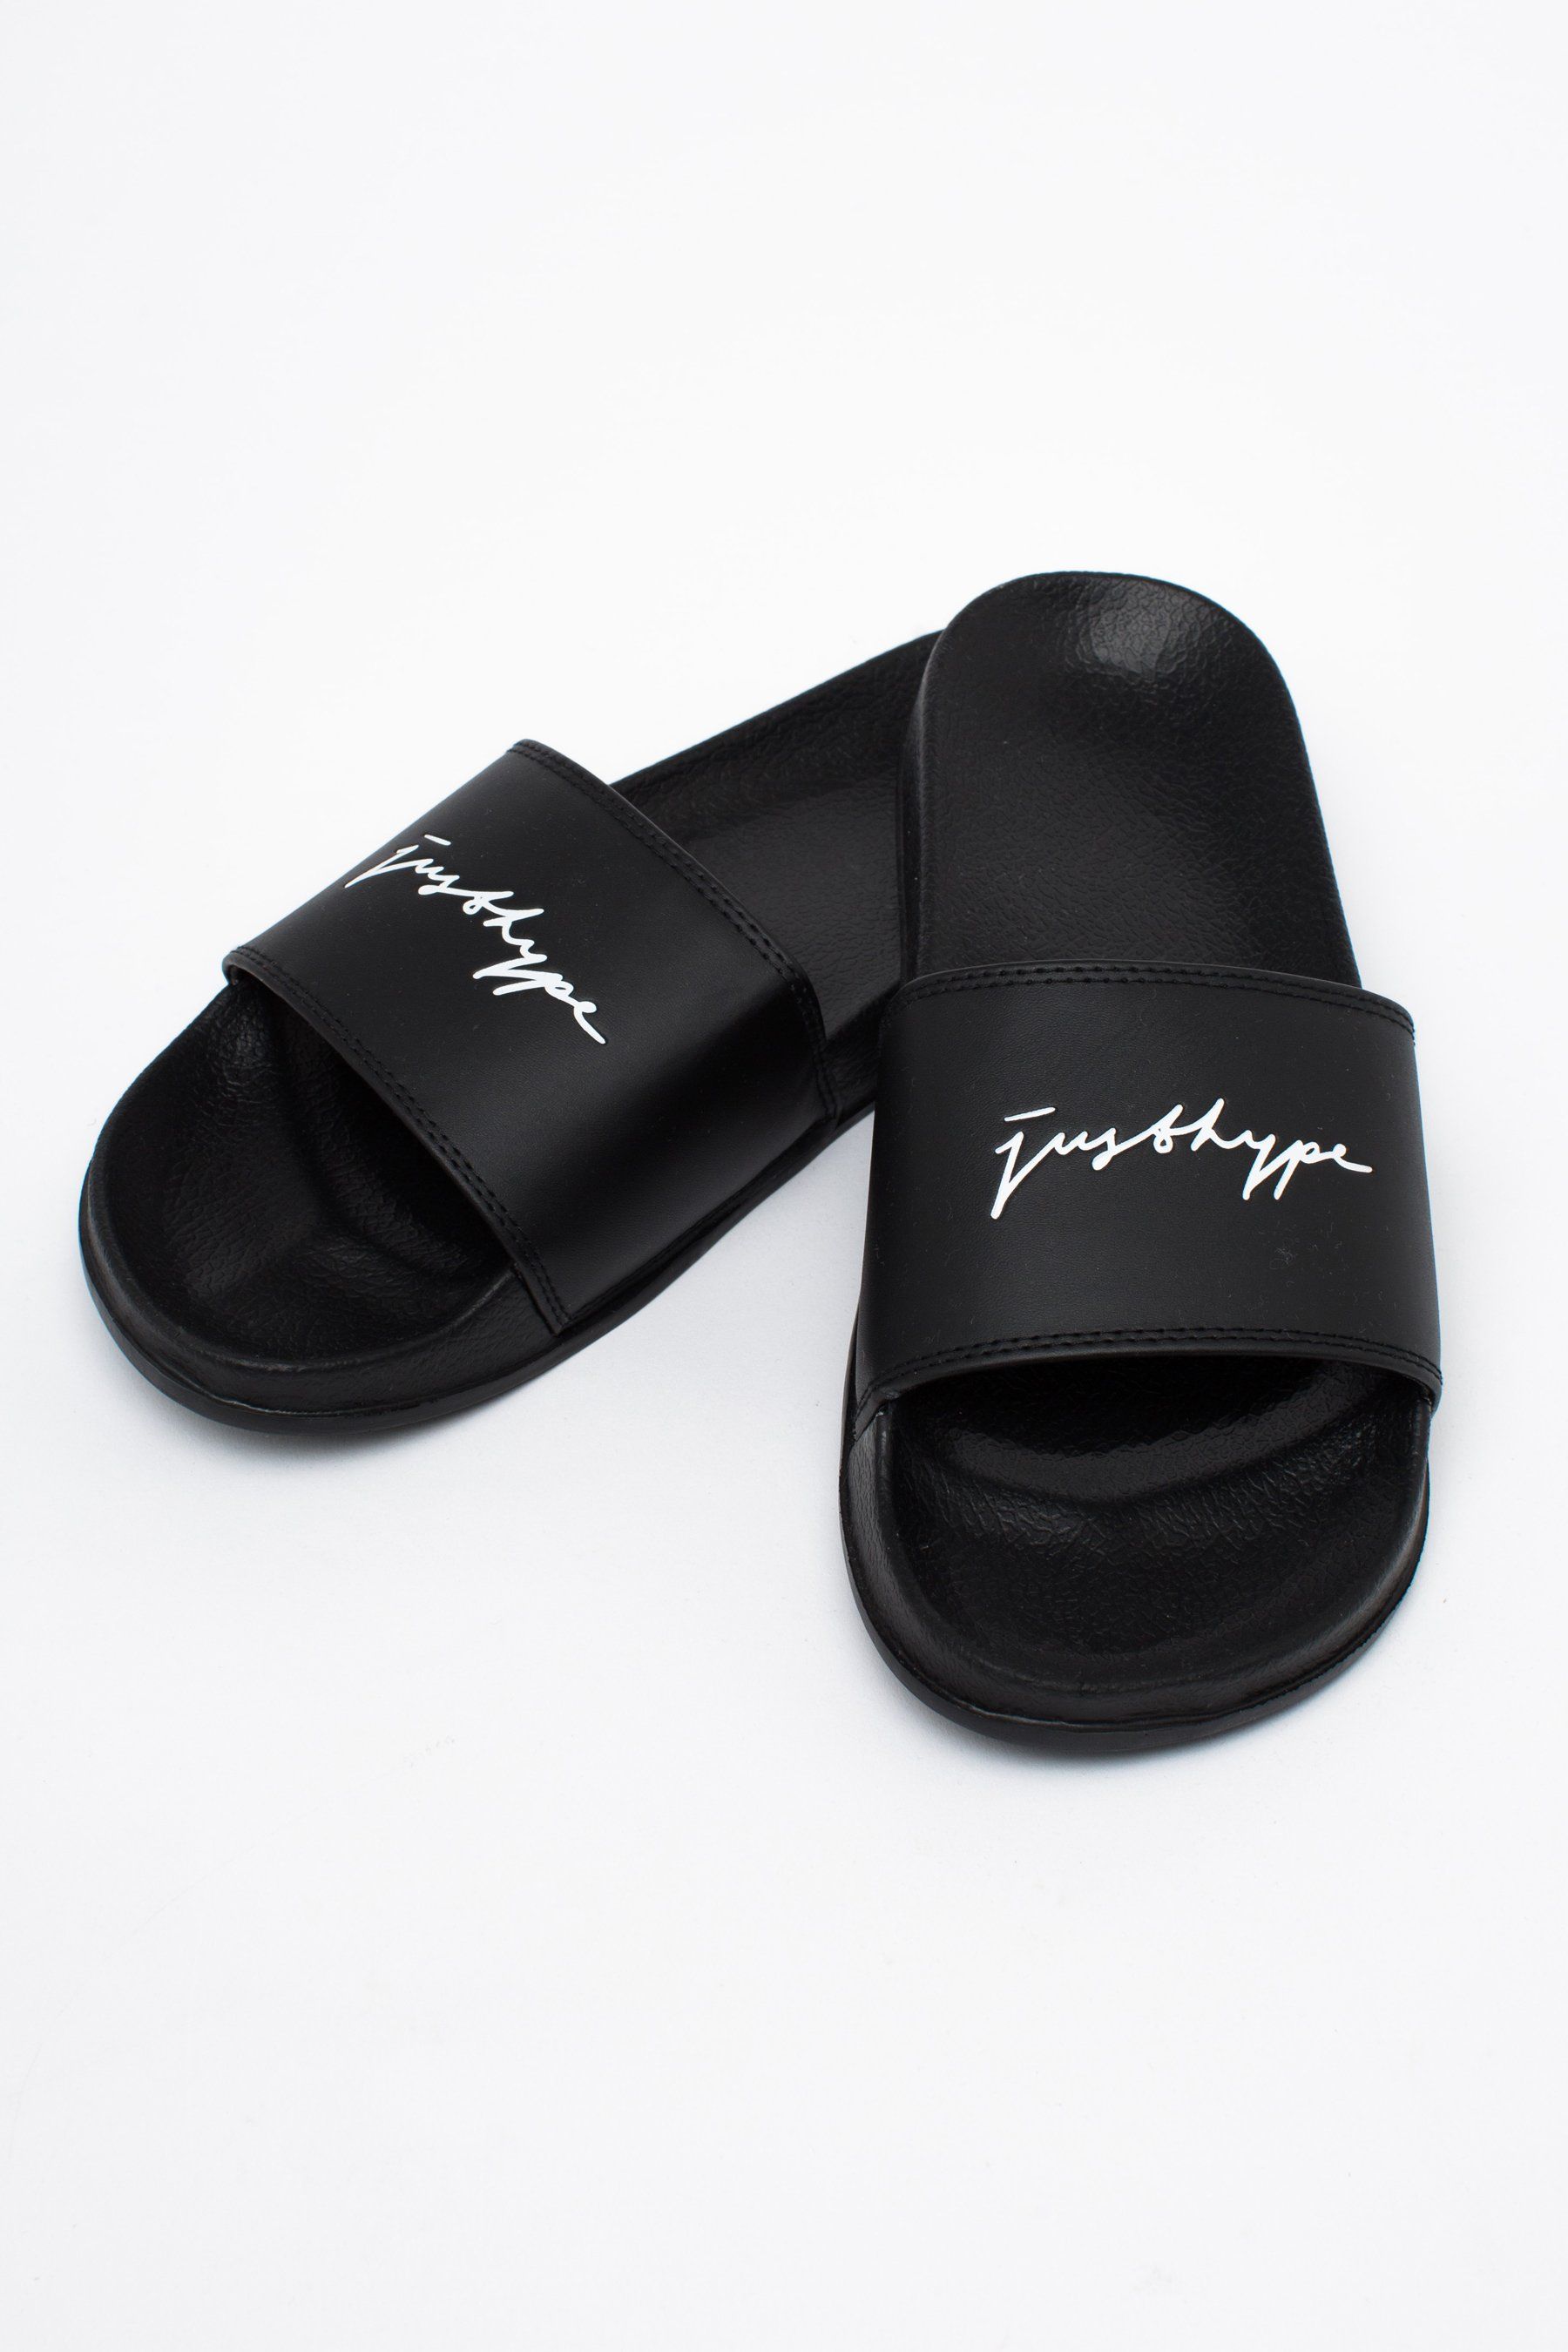 The ultimate footwear to take your comfort level from 0 - 100. The HYPE. men's black signature sliders feature a black base on the sole and crest. Designed in the upmost supreme amount of comfort finished with the just hype signature logo in a contrasting white. Wear around the pool with swim shorts or with a tracksuit set and ribbed crew socks for an off-duty style. Wipe clean only.